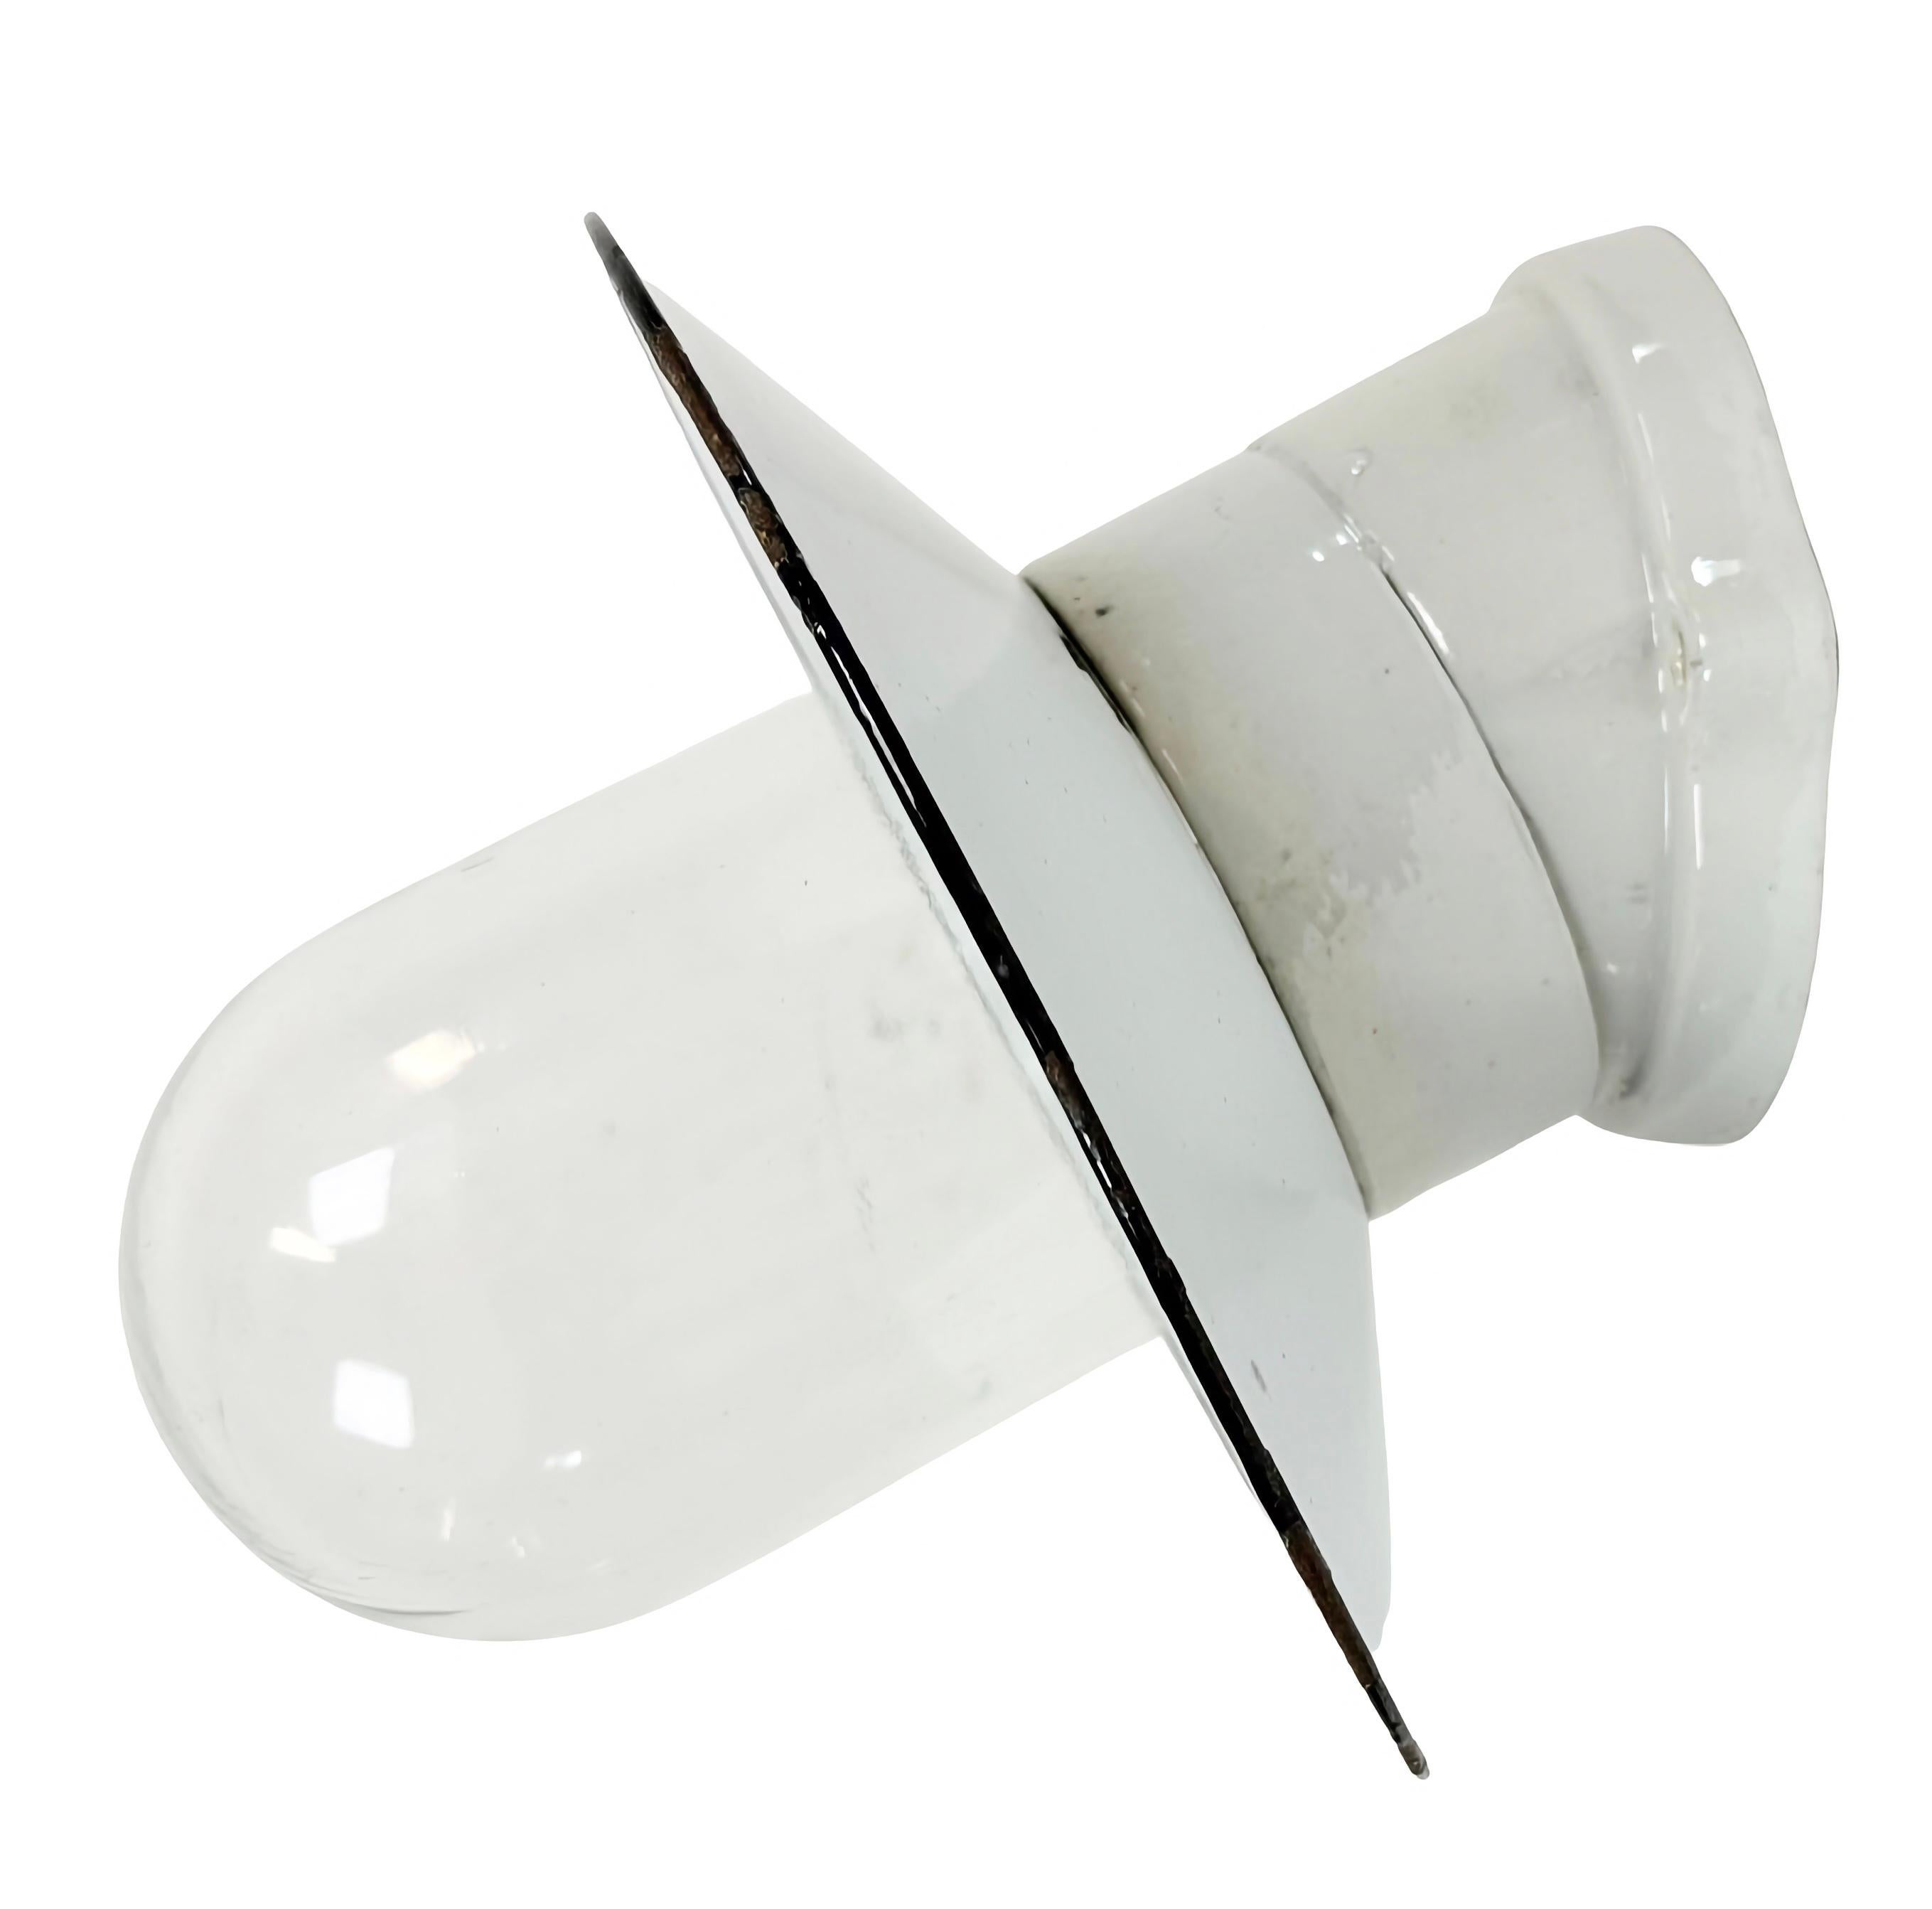 Vintage Industrial light made in Poland during the 1960s. It features a white porcelain wall mounting,a white enamel shade and a clear glass cover. The socket requires E27/ E26 light bulbs. New wire. The weight of the lamp is 1.3 kg.